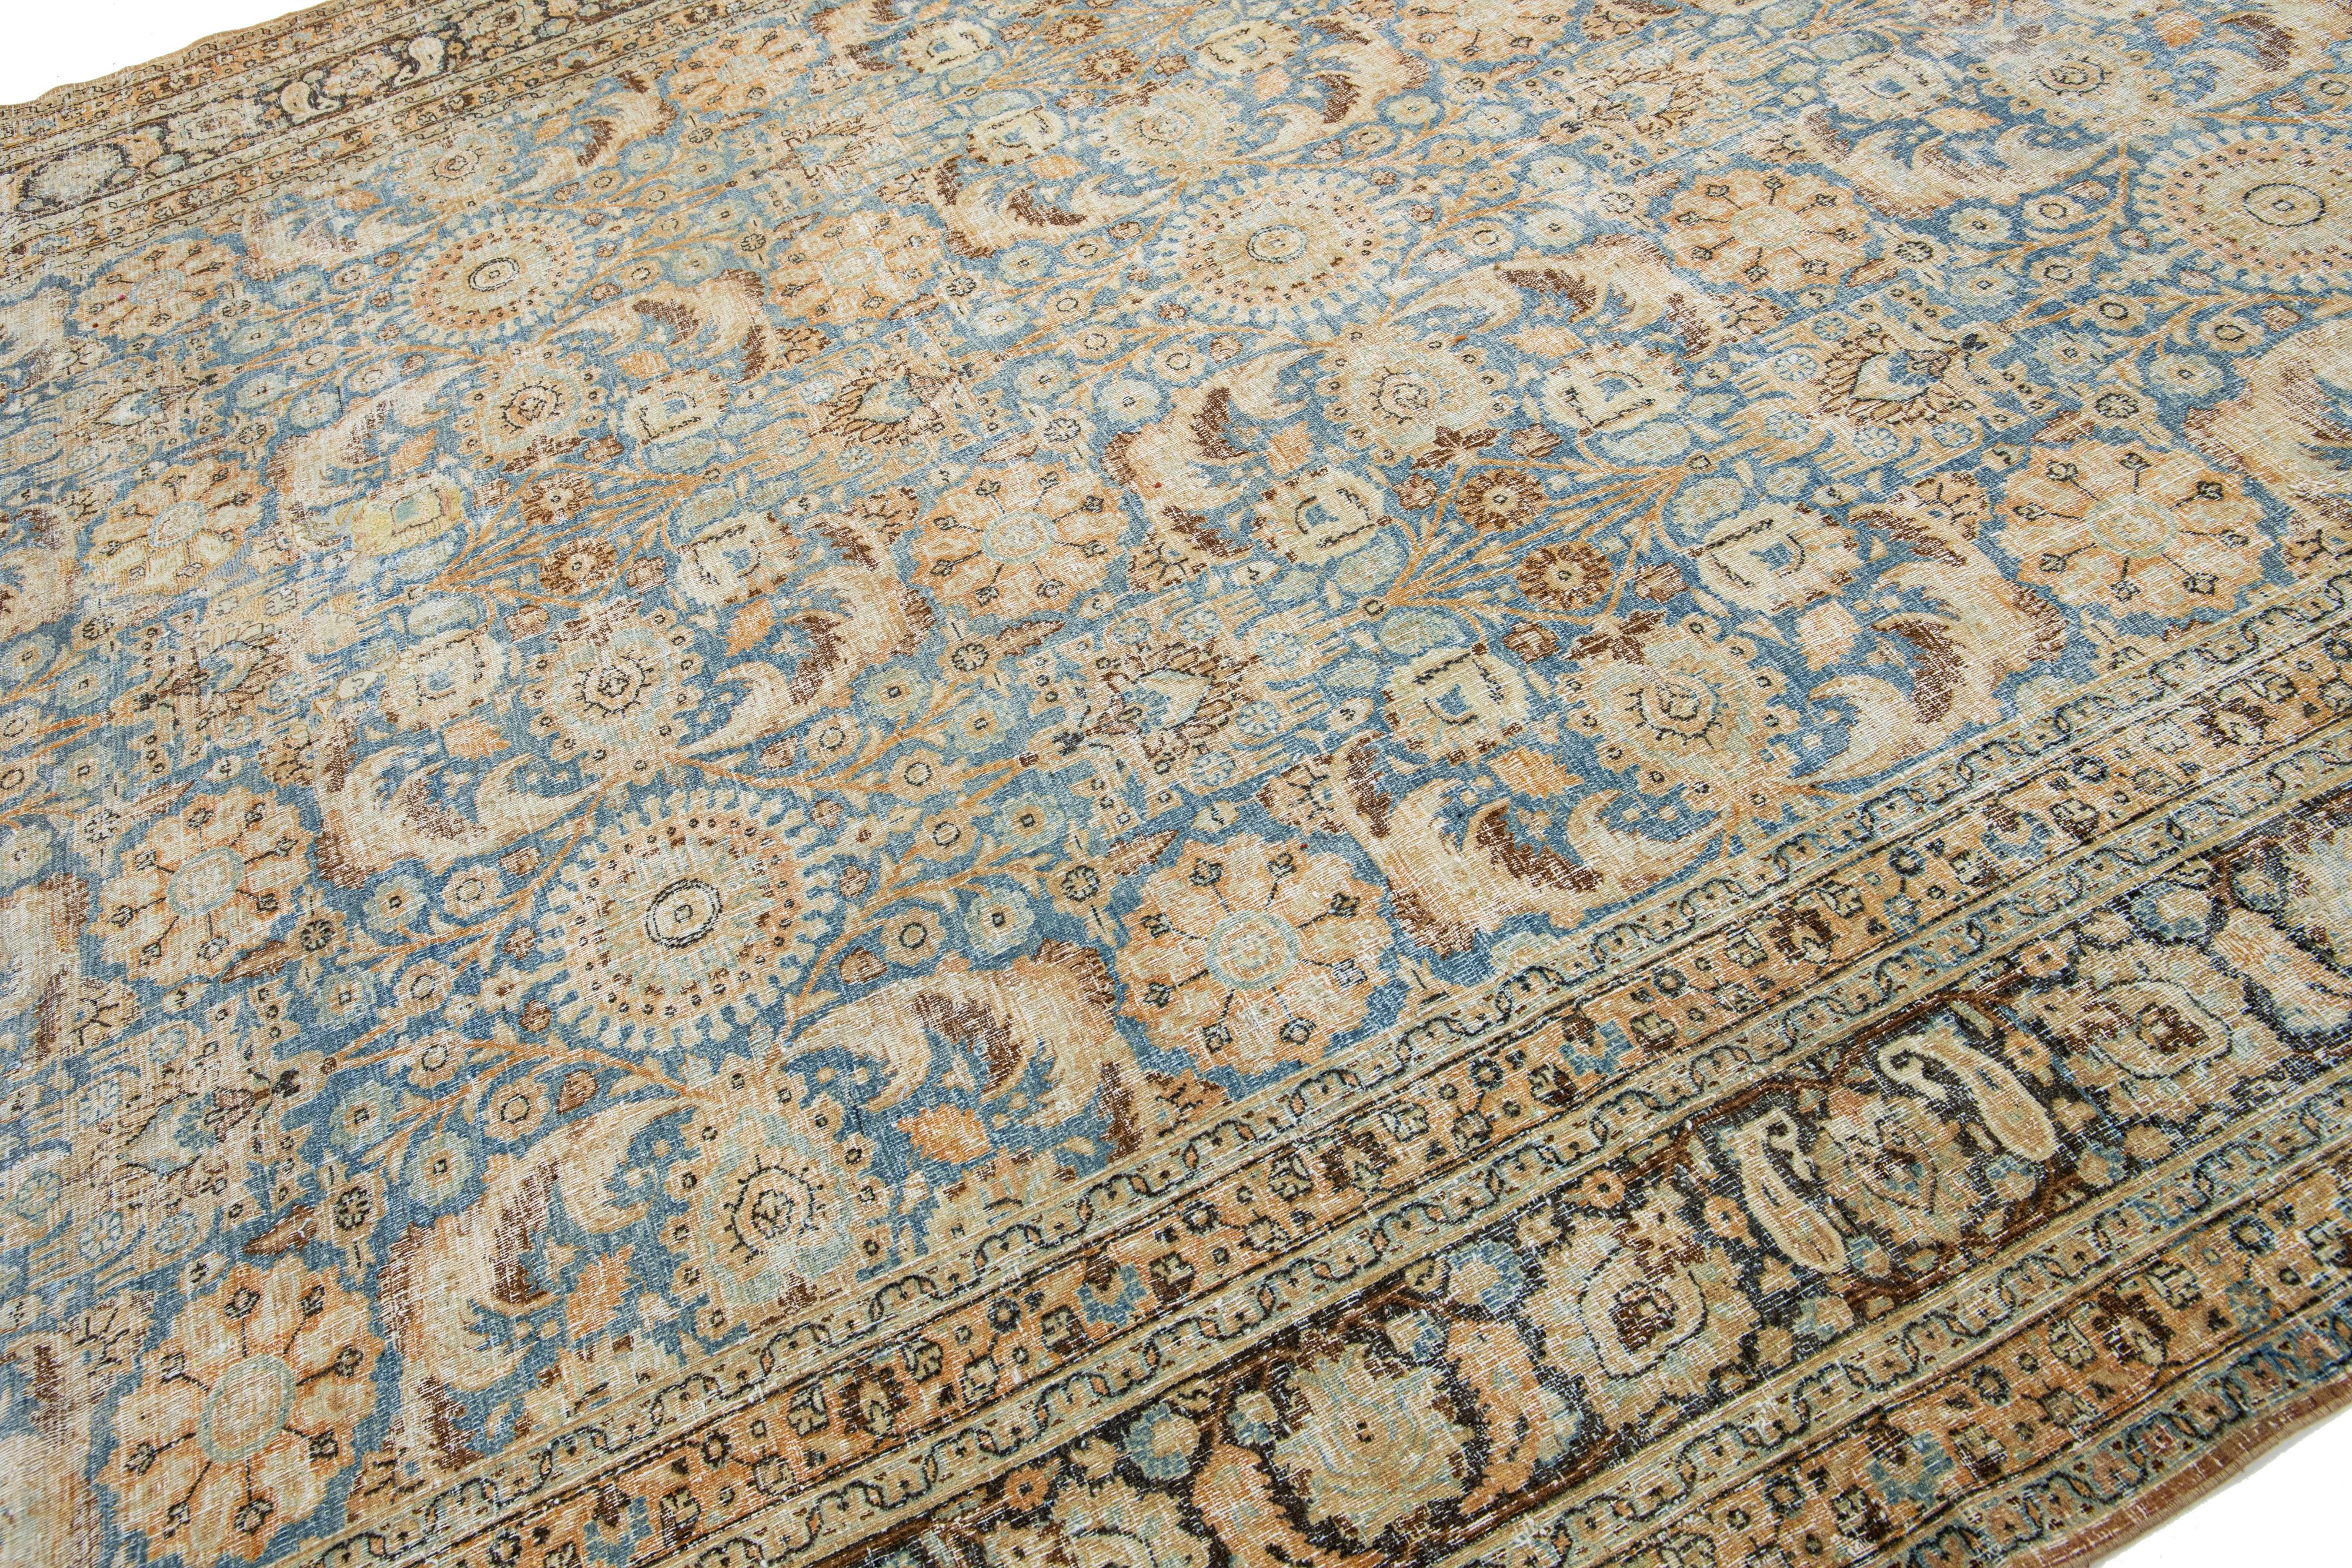 Hand-Knotted Room Size Floral Antique Persian Tabriz Wool Rug In Blue For Sale